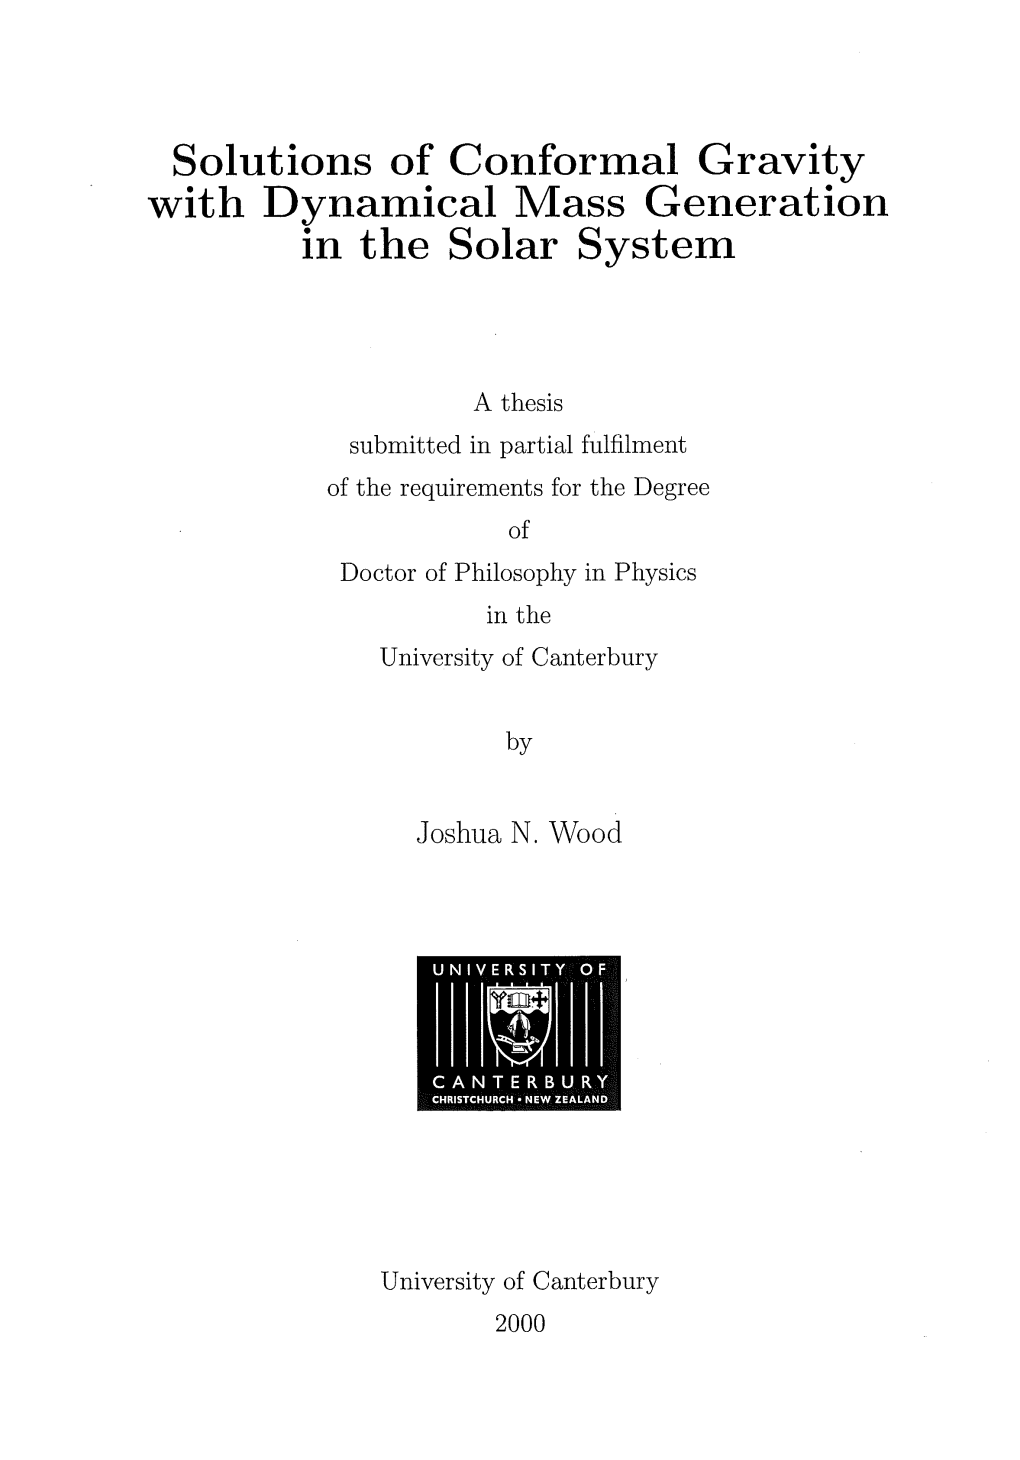 Solutions of Conformal Gravity with Dynamical Mass Generation in the Solar System